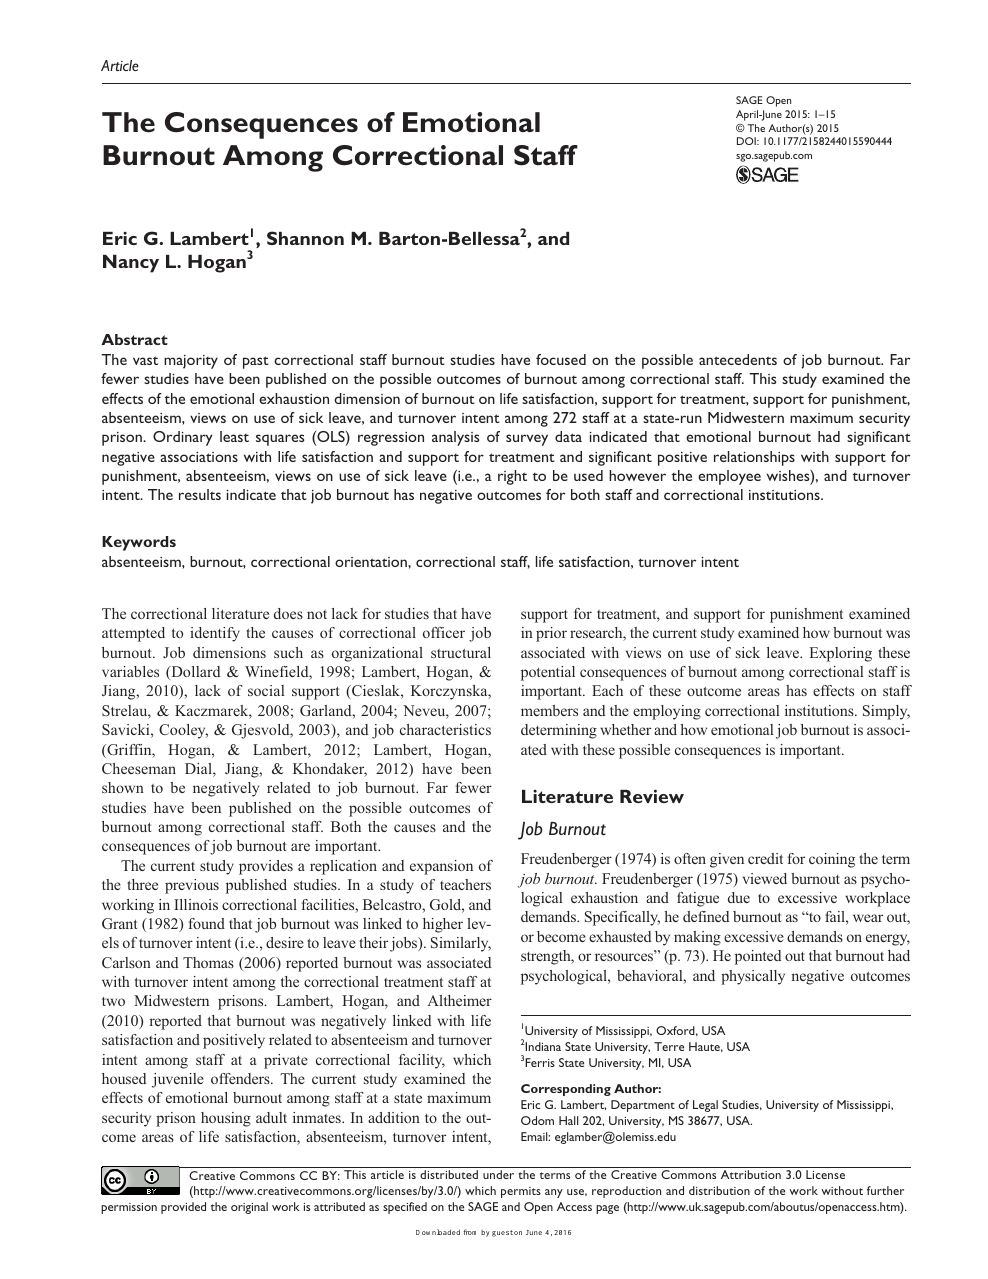 The Consequences Of Emotional Burnout Among Correctional Staff Topic Of Research Paper In Sociology Download Scholarly Article Pdf And Read For Free On Cyberleninka Open Science Hub